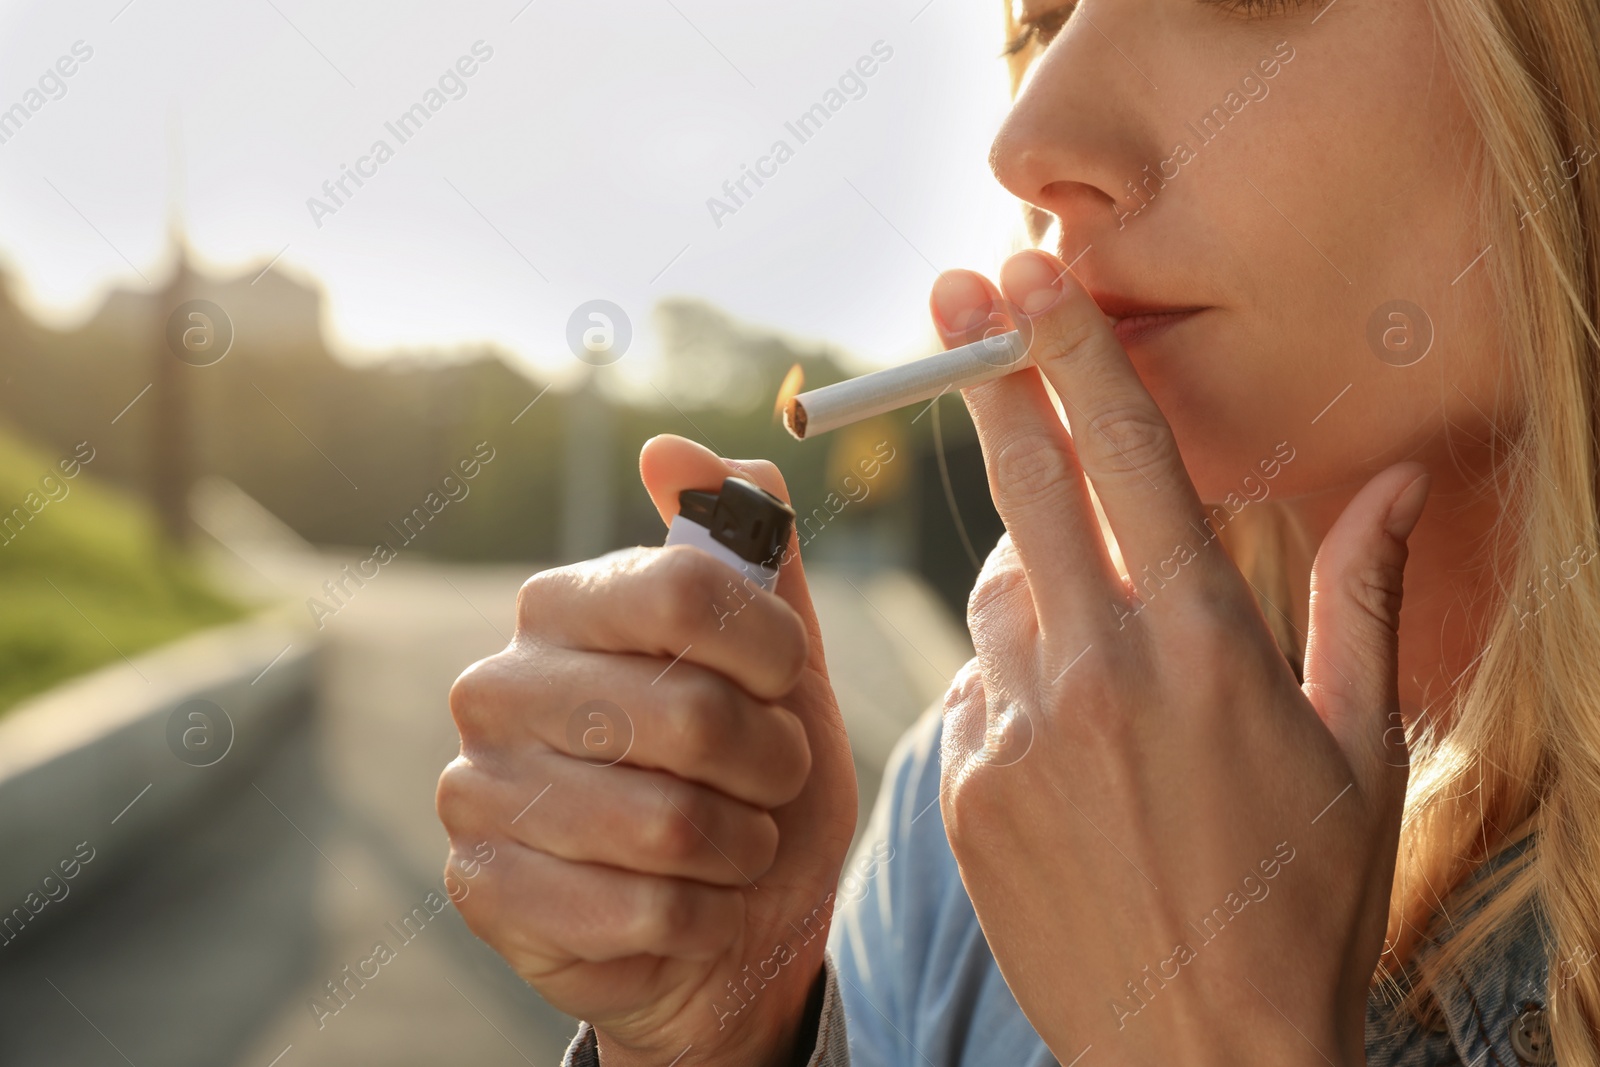 Photo of Young woman lighting cigarette outdoors, closeup of hands